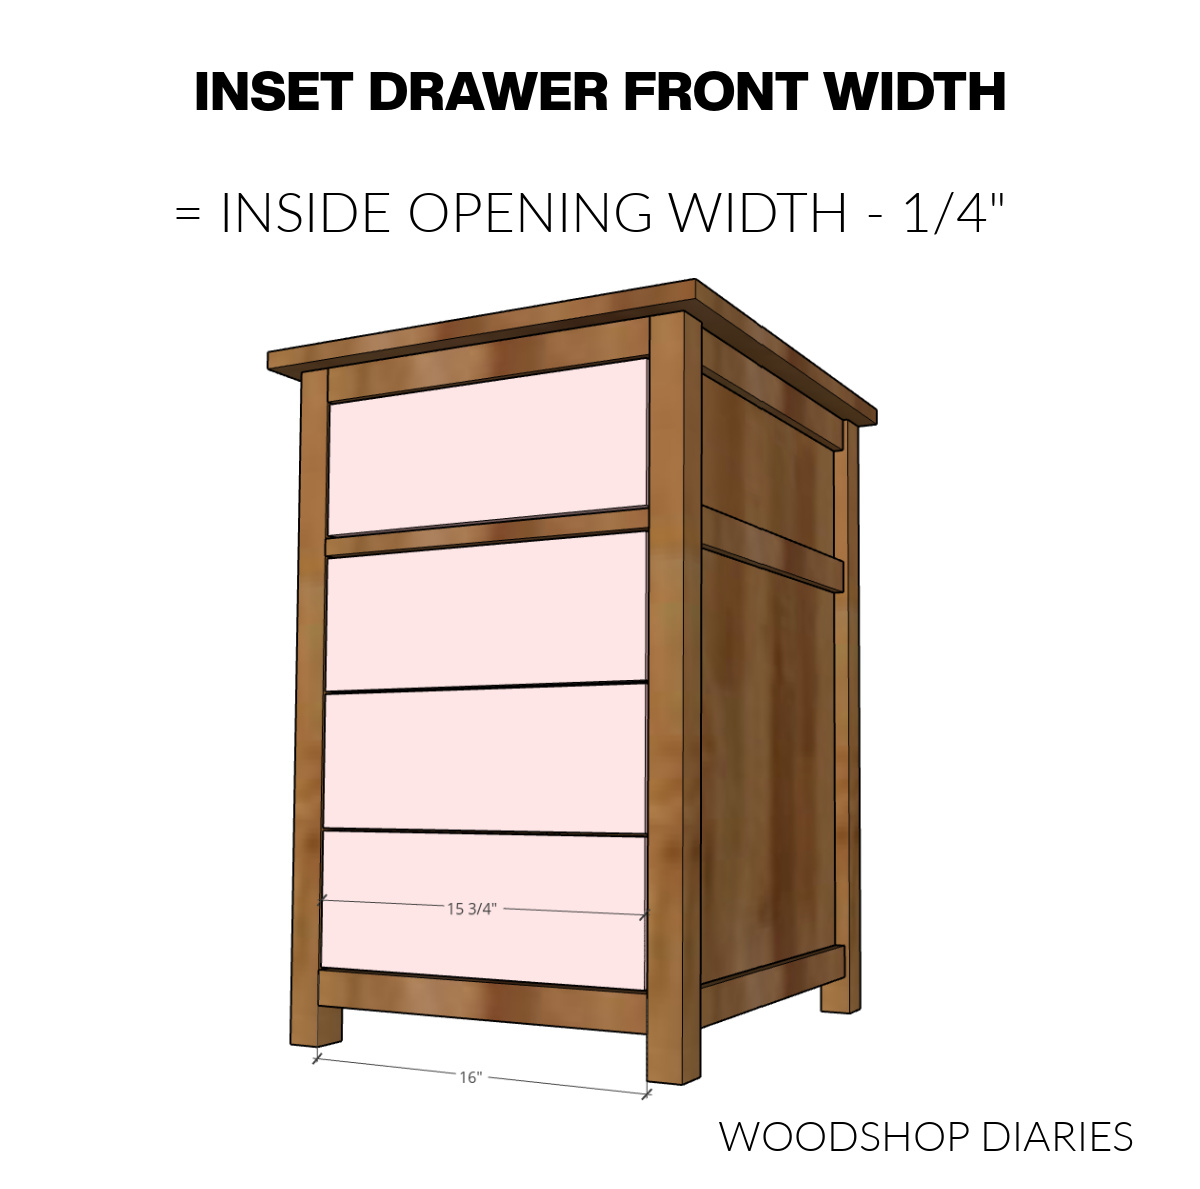 Computer drawn diagram showing inset drawer front width measurement